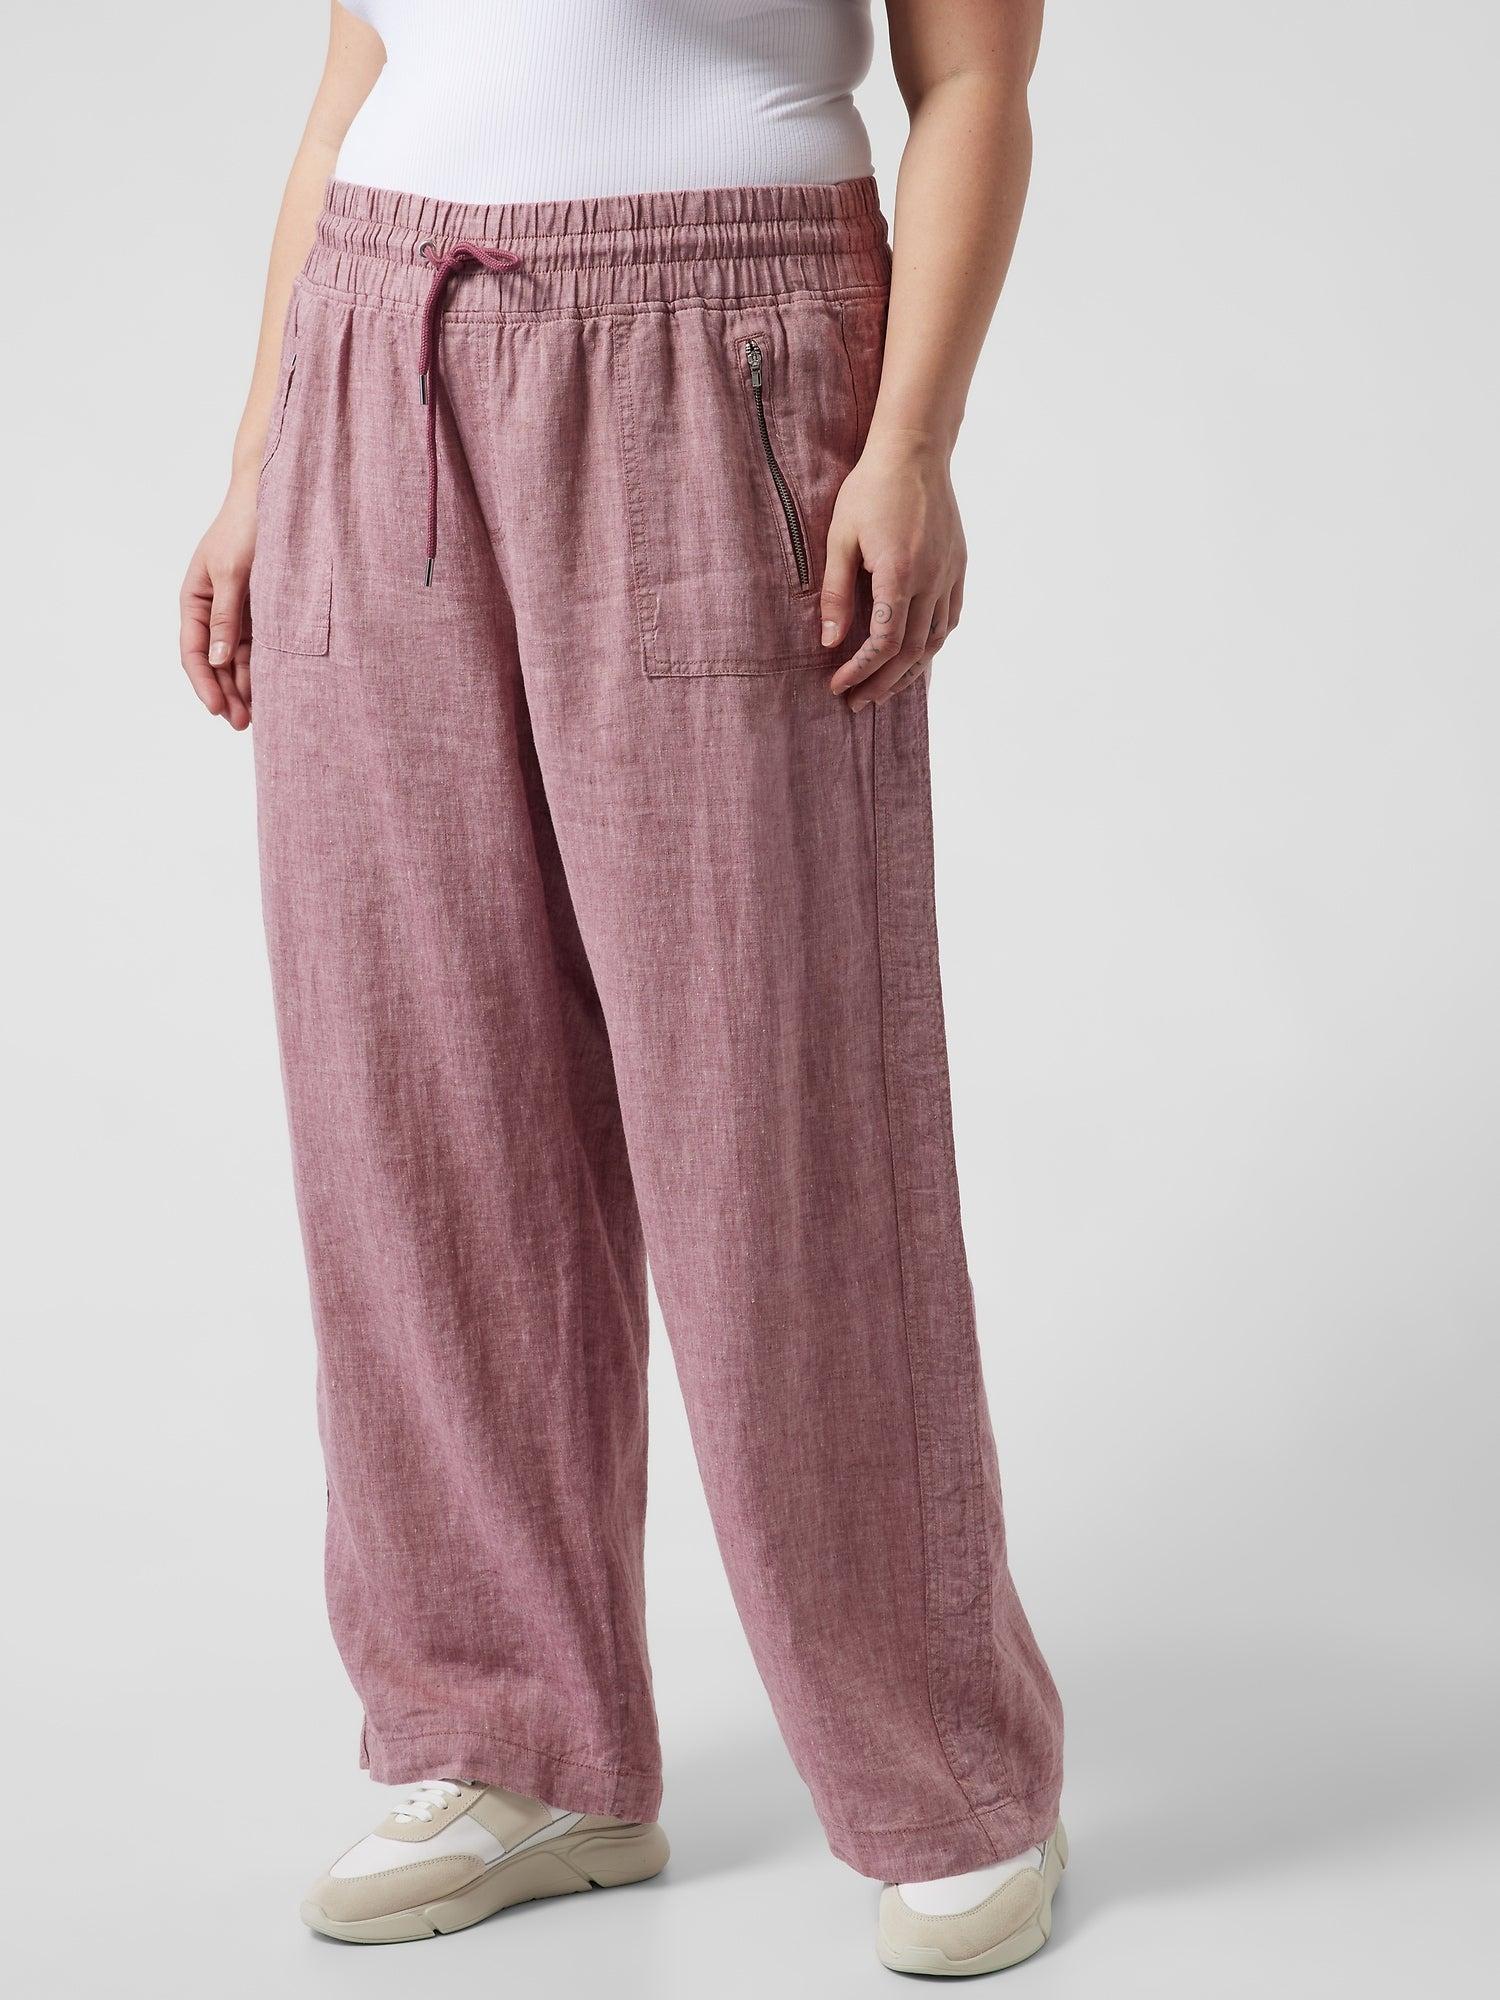 Athleta Cabo Linen Wide Leg Pant in Red